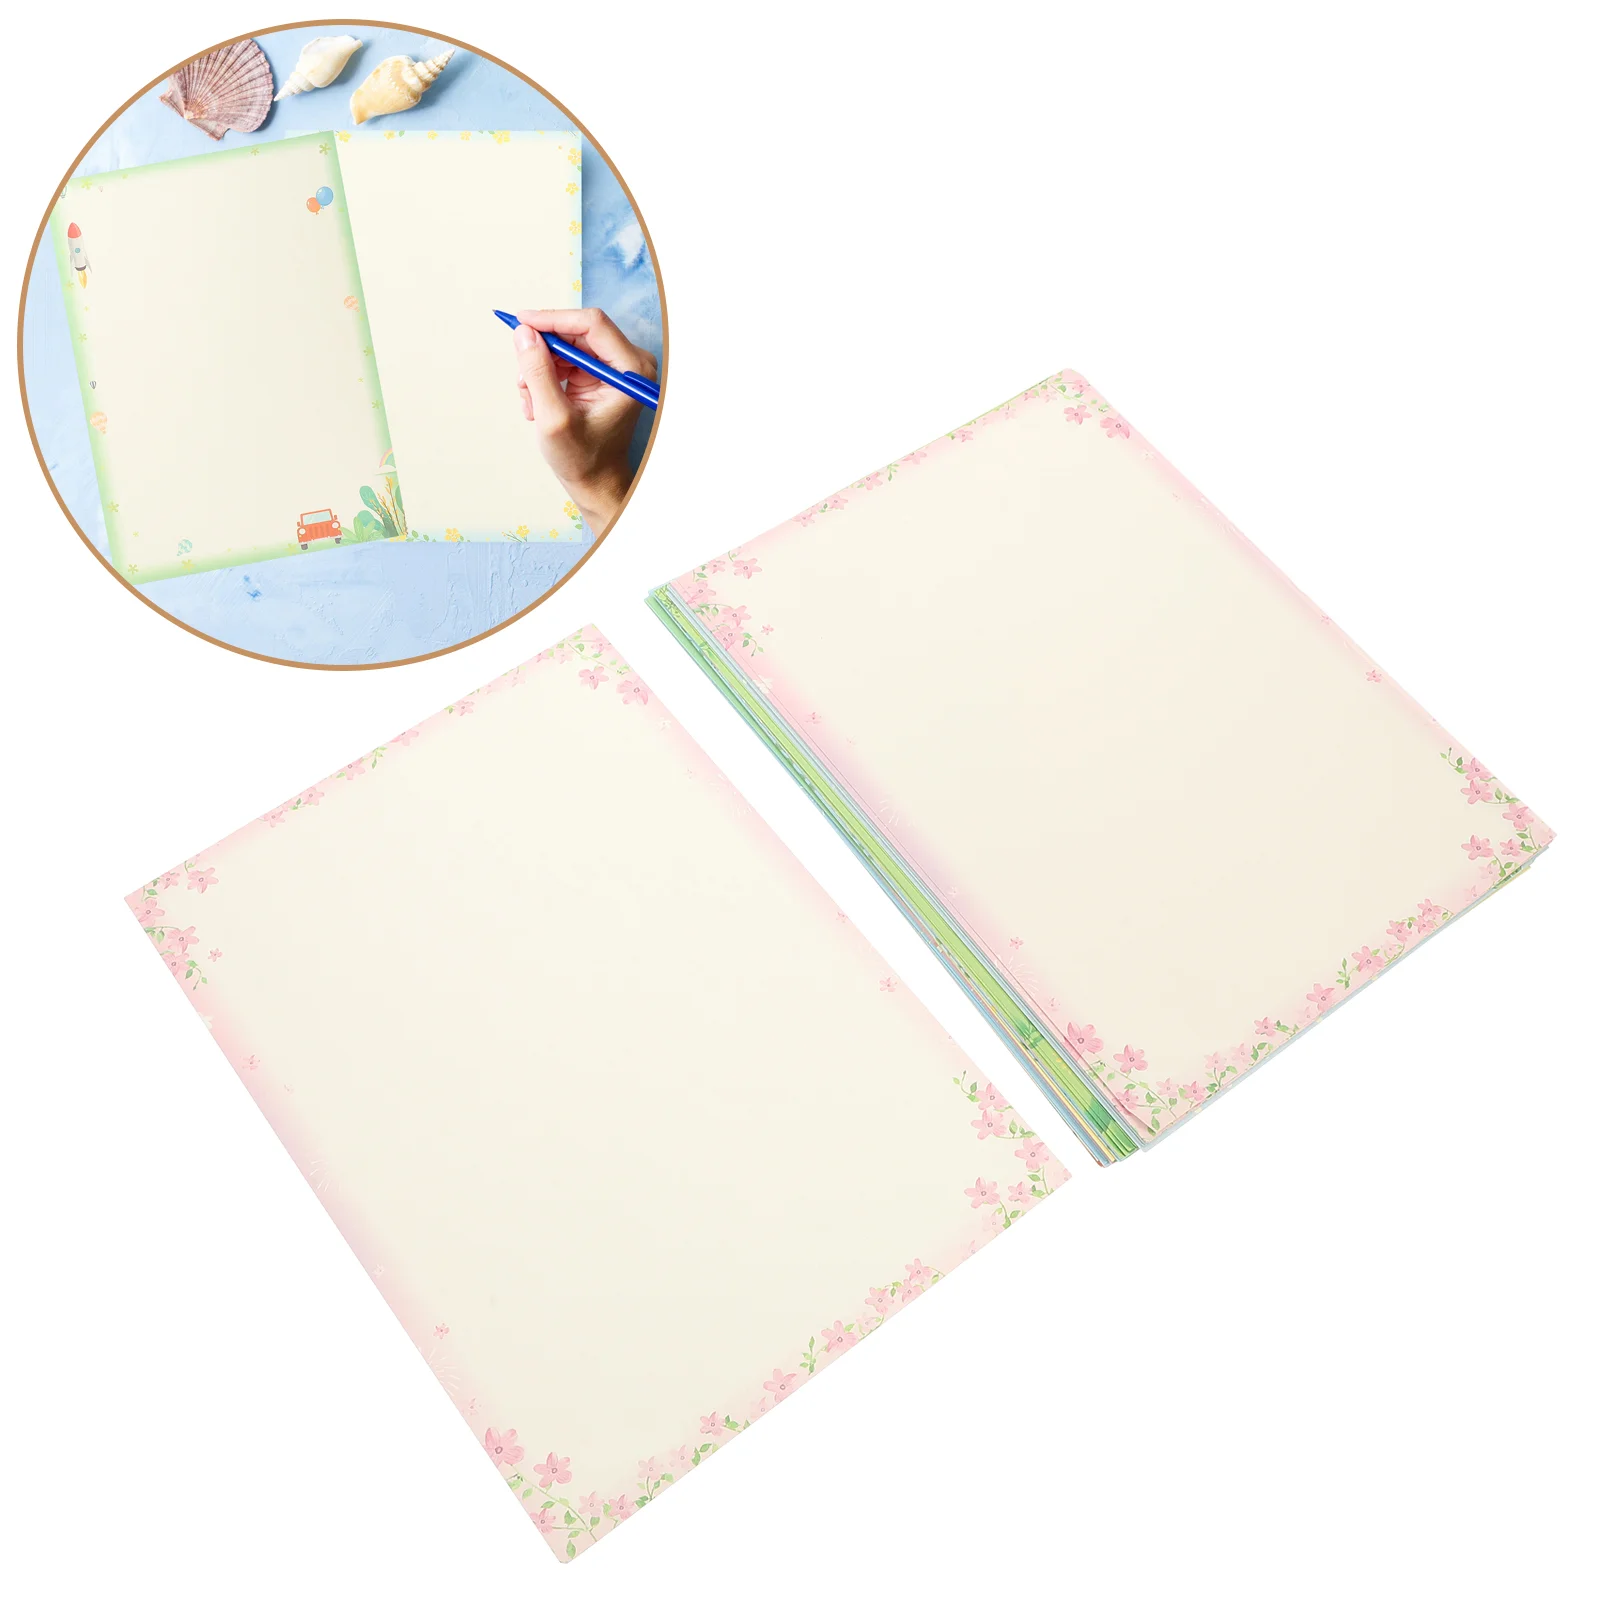 

50 Sheets A4 Lace Computer Paper Color Copy Painting Printing 1 Pack (50pcs) Papers Printer Binder Supply Delicate